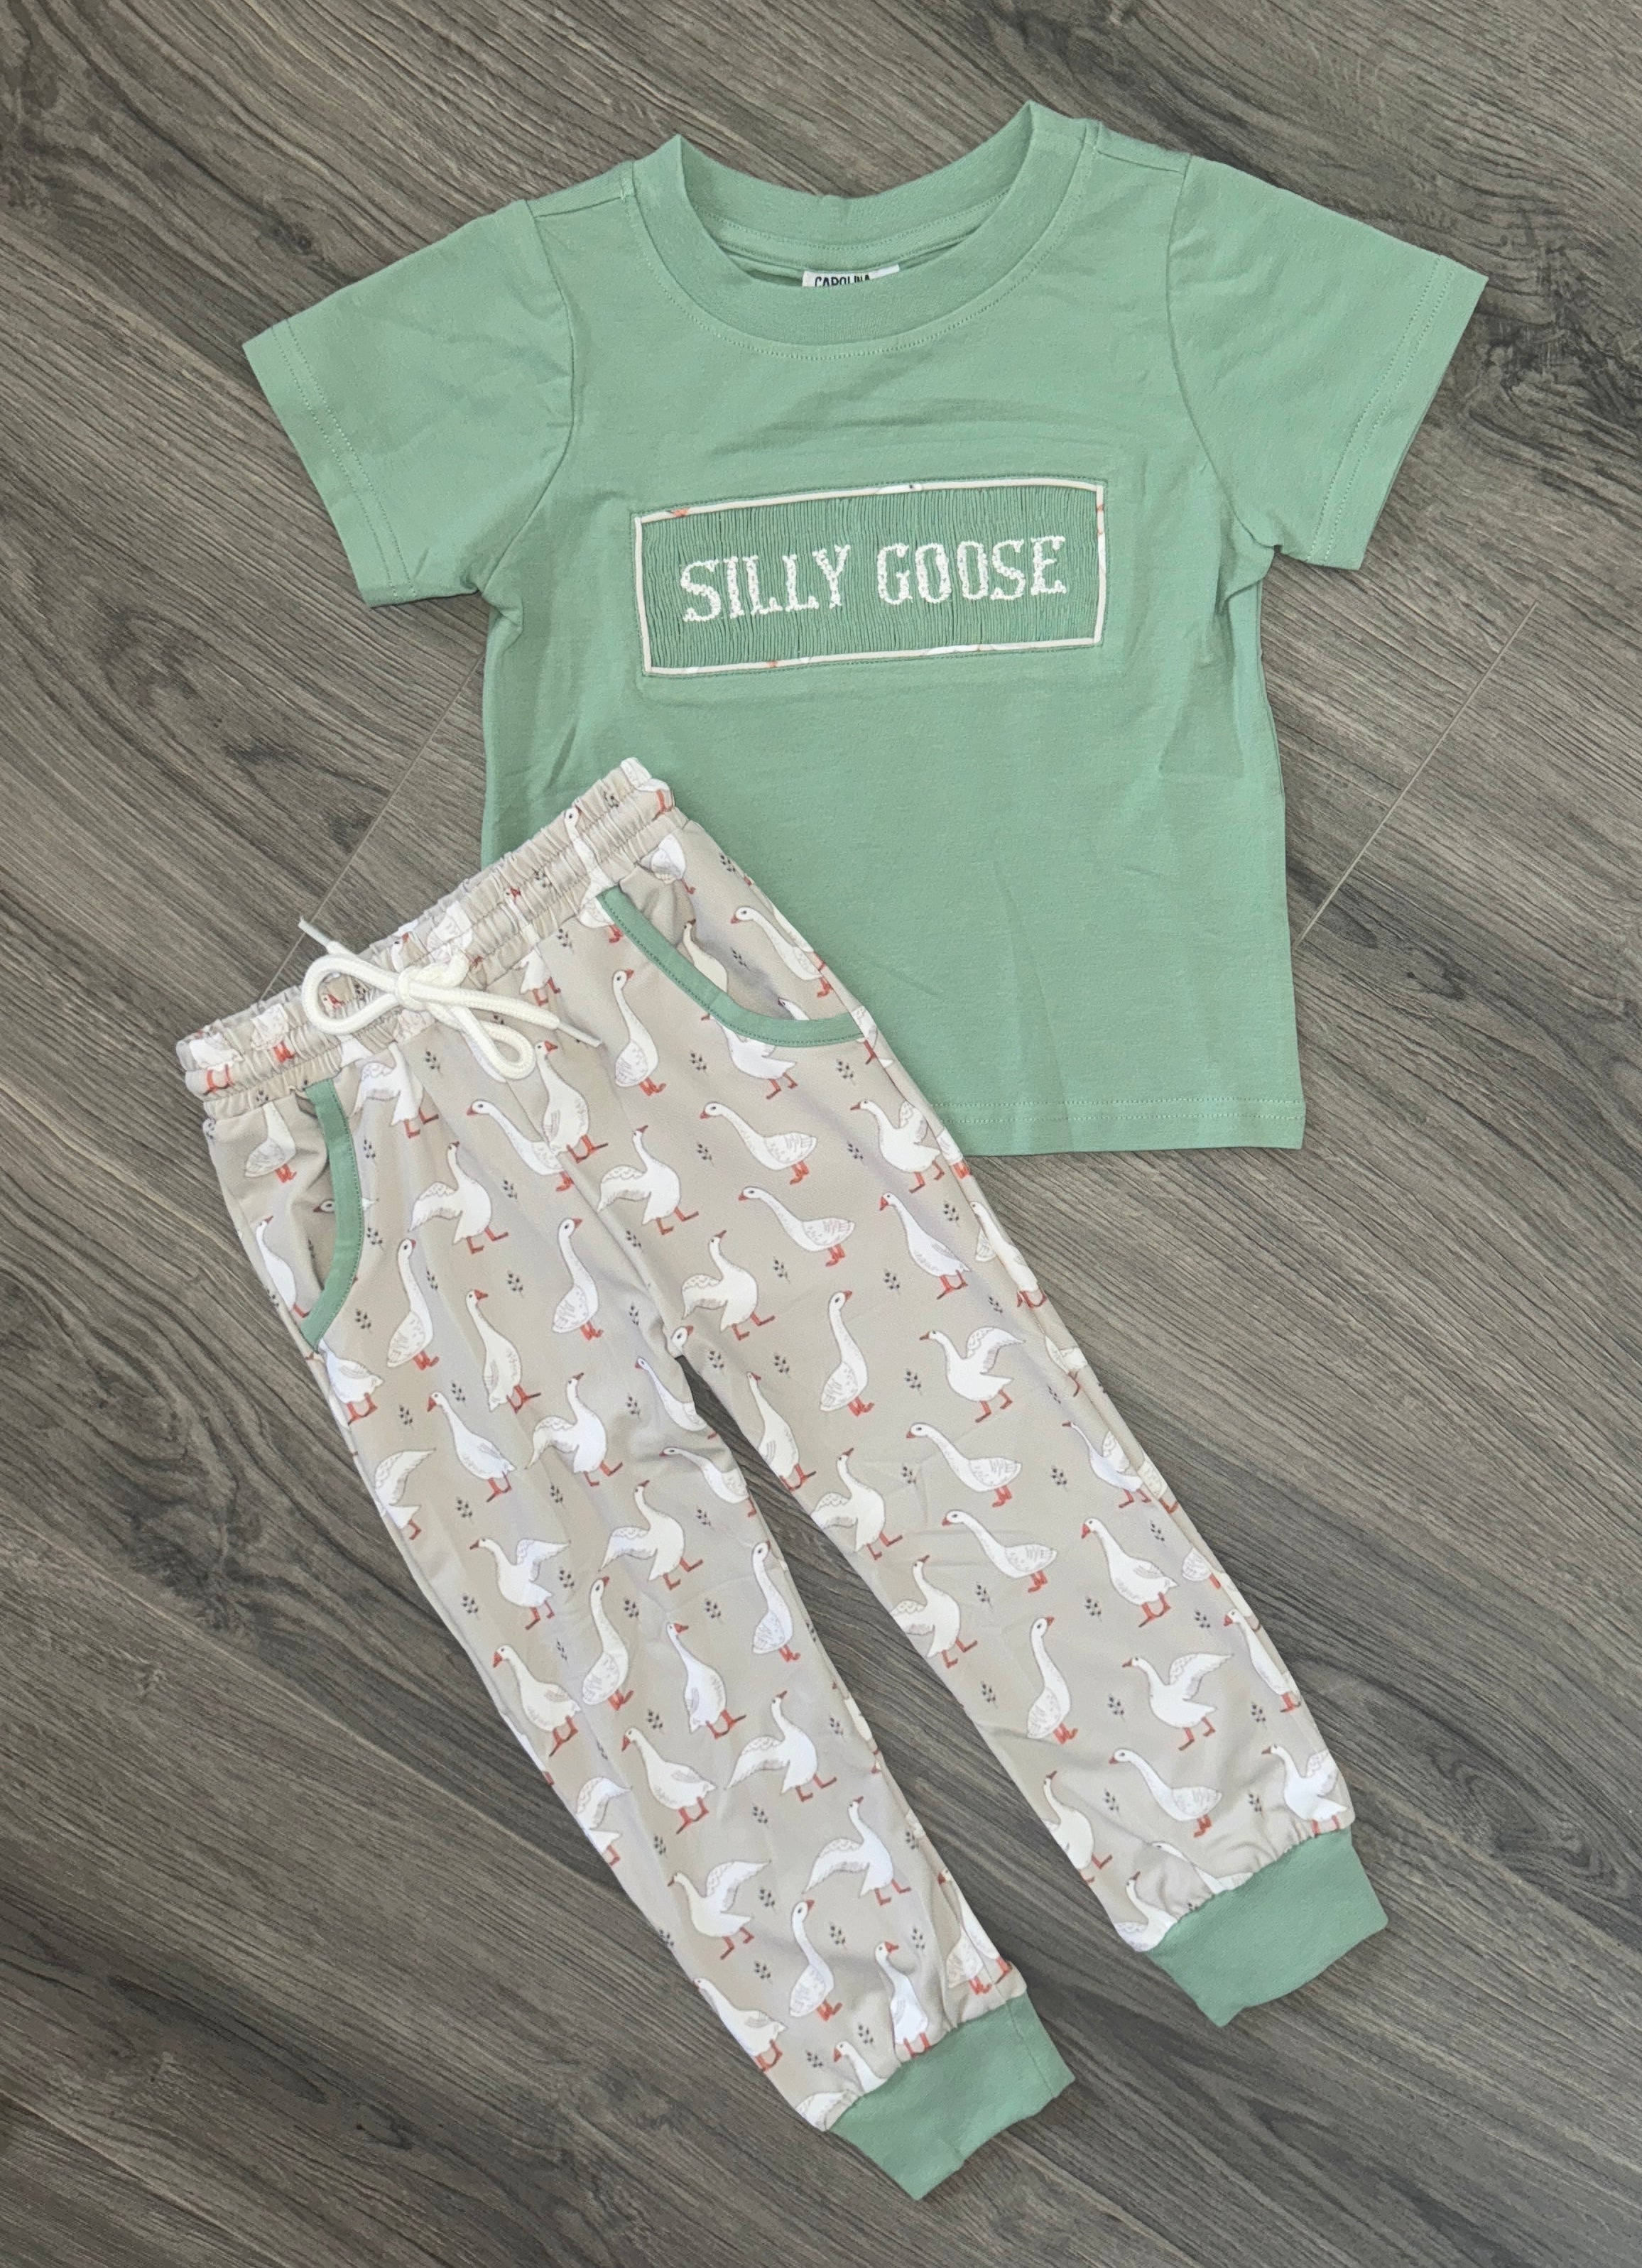 Silly Goose Jogger Set